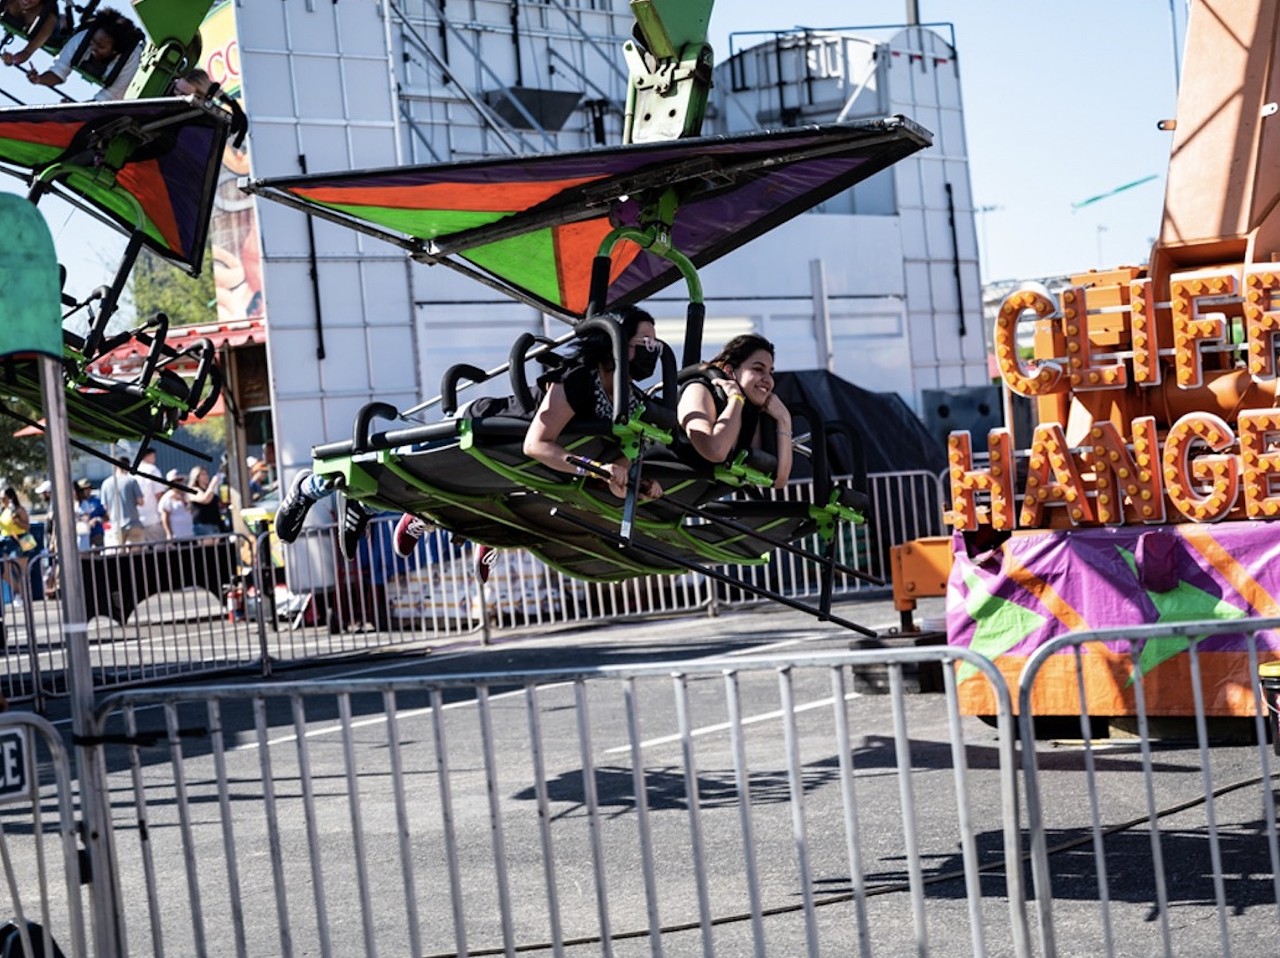 Deprive your children of fun (and risk serious psychological damage) by not letting them on carnival rides or have food on a pointed stick.